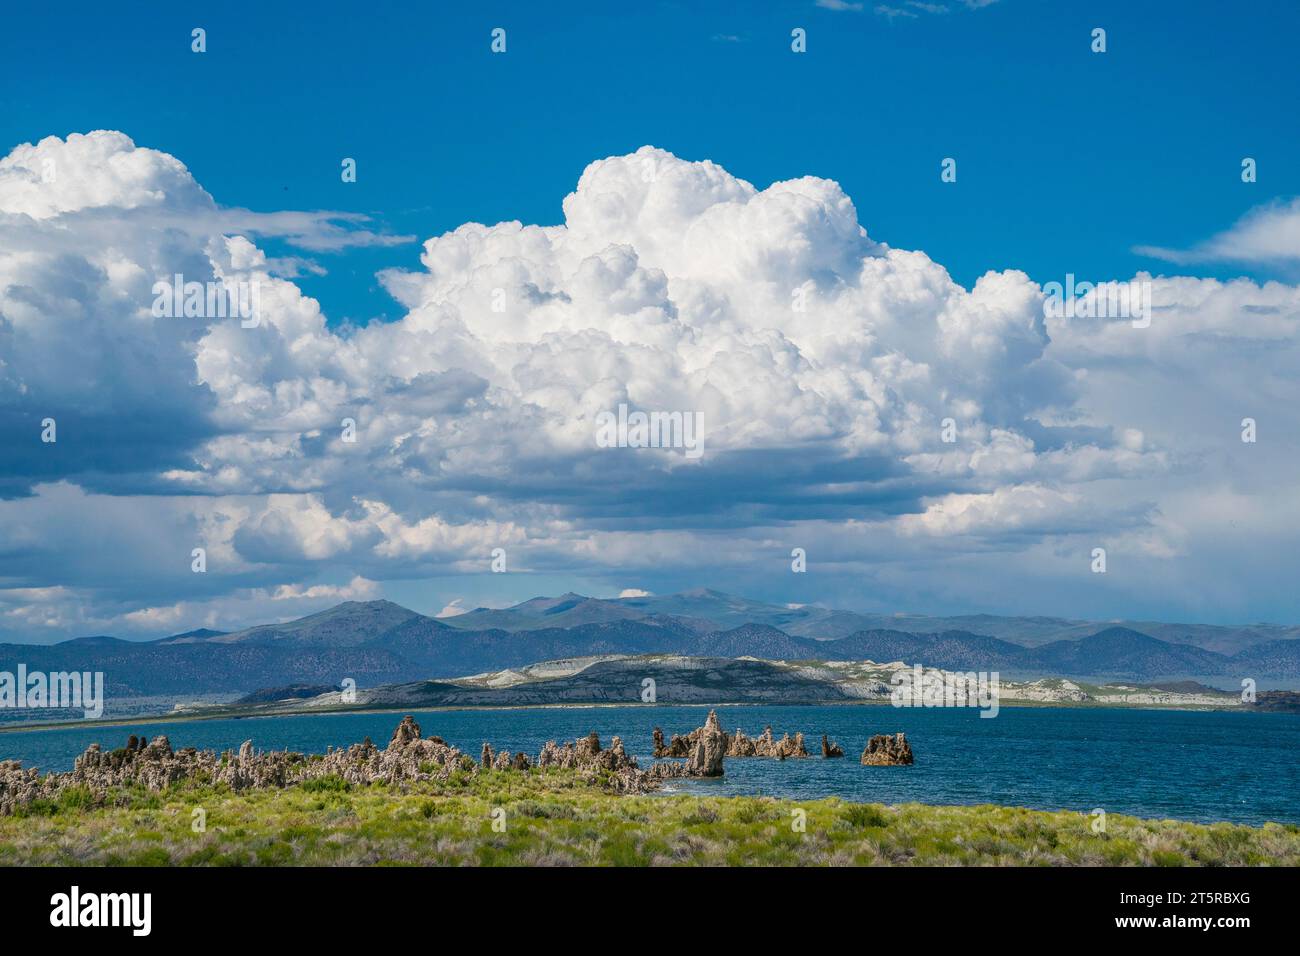 Tufa towers at Mono Lake. The unusual rock formations that grace Mono Lake's shores are known as tufa. Stock Photo